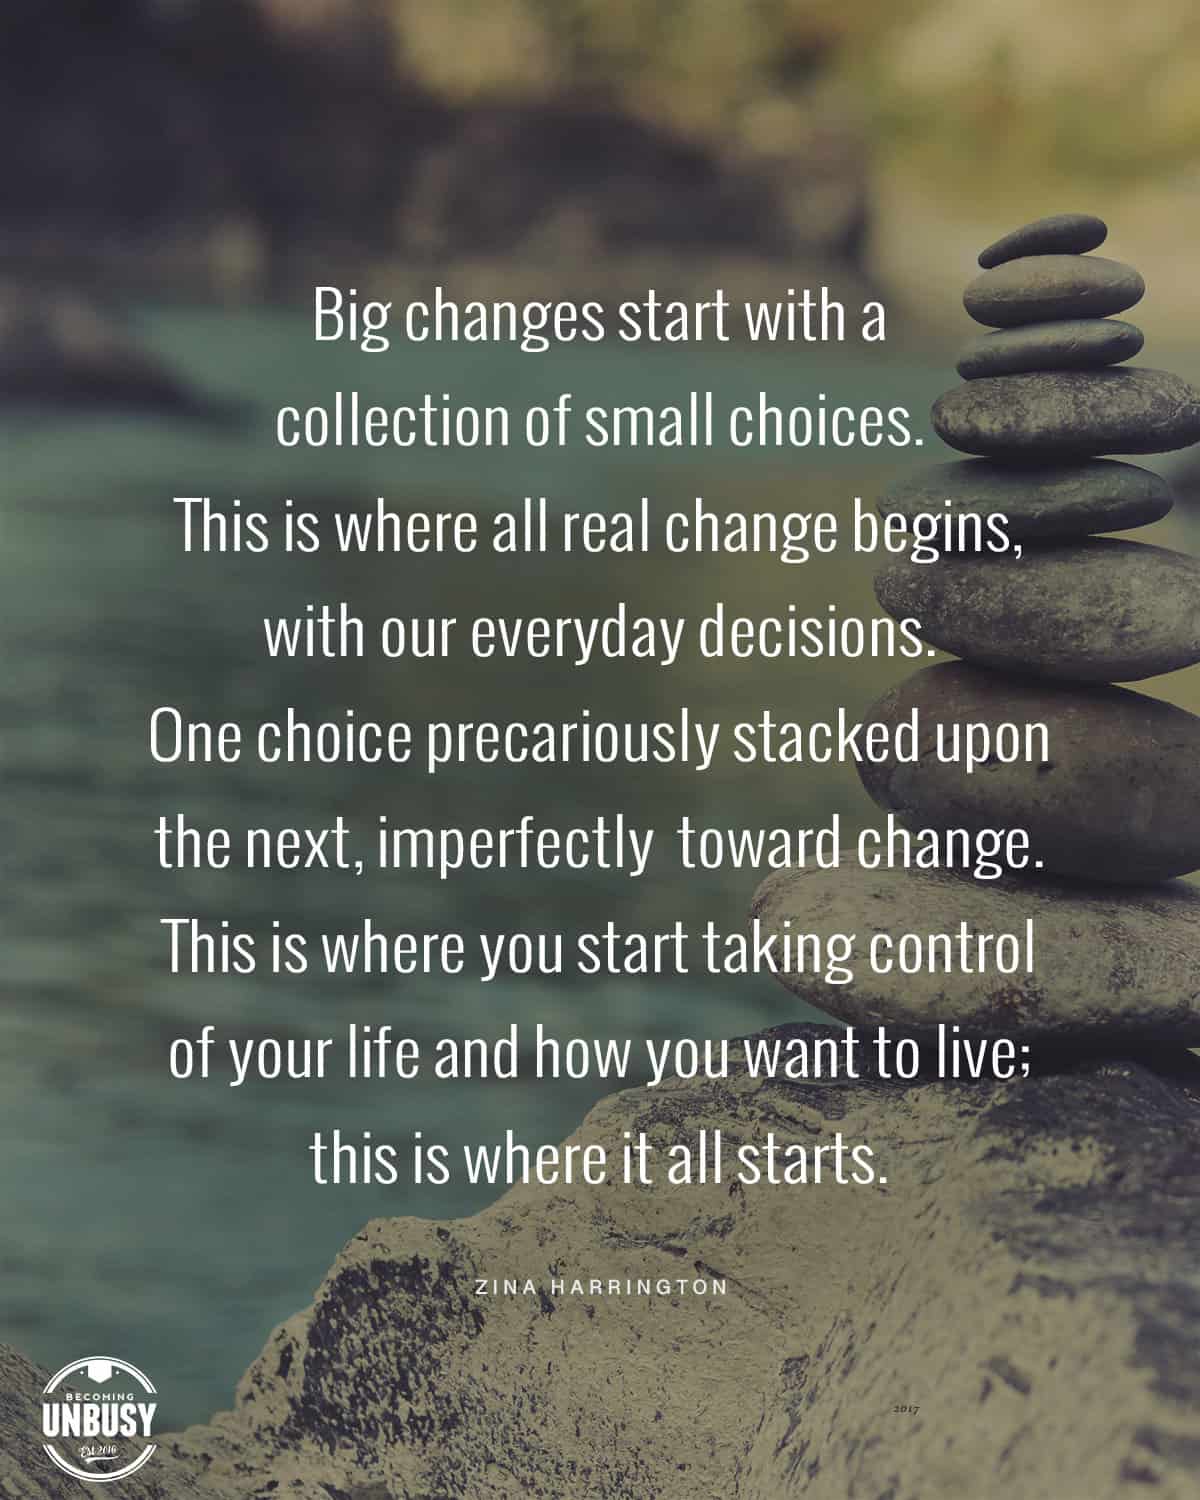 A cairn stack of rocks with the following quote written on top of the images, "Big changes start with a collection of small choices. This is where all real change begins, with our everyday decisions. One choice precariously stacked upon the next, imperfectly building toward change. This is where you start taking control of your life and how you want to live; this is where it all starts."